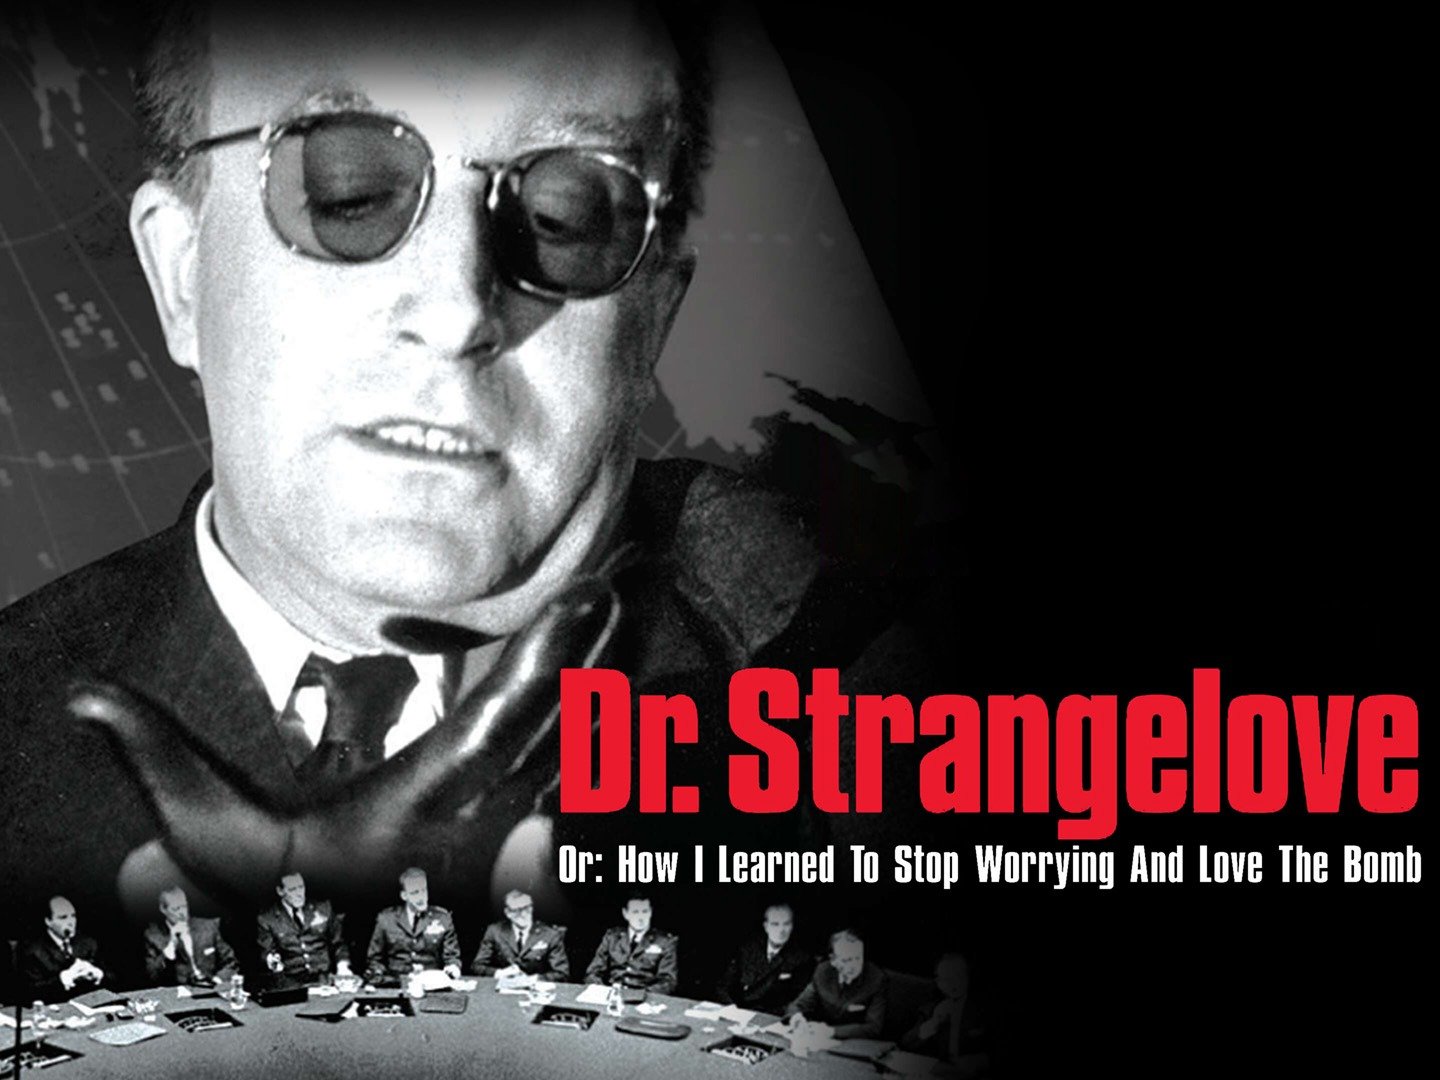 "Dr. Strangelove Or: How I Learned to Stop Worrying and Love the Bomb photo 13"